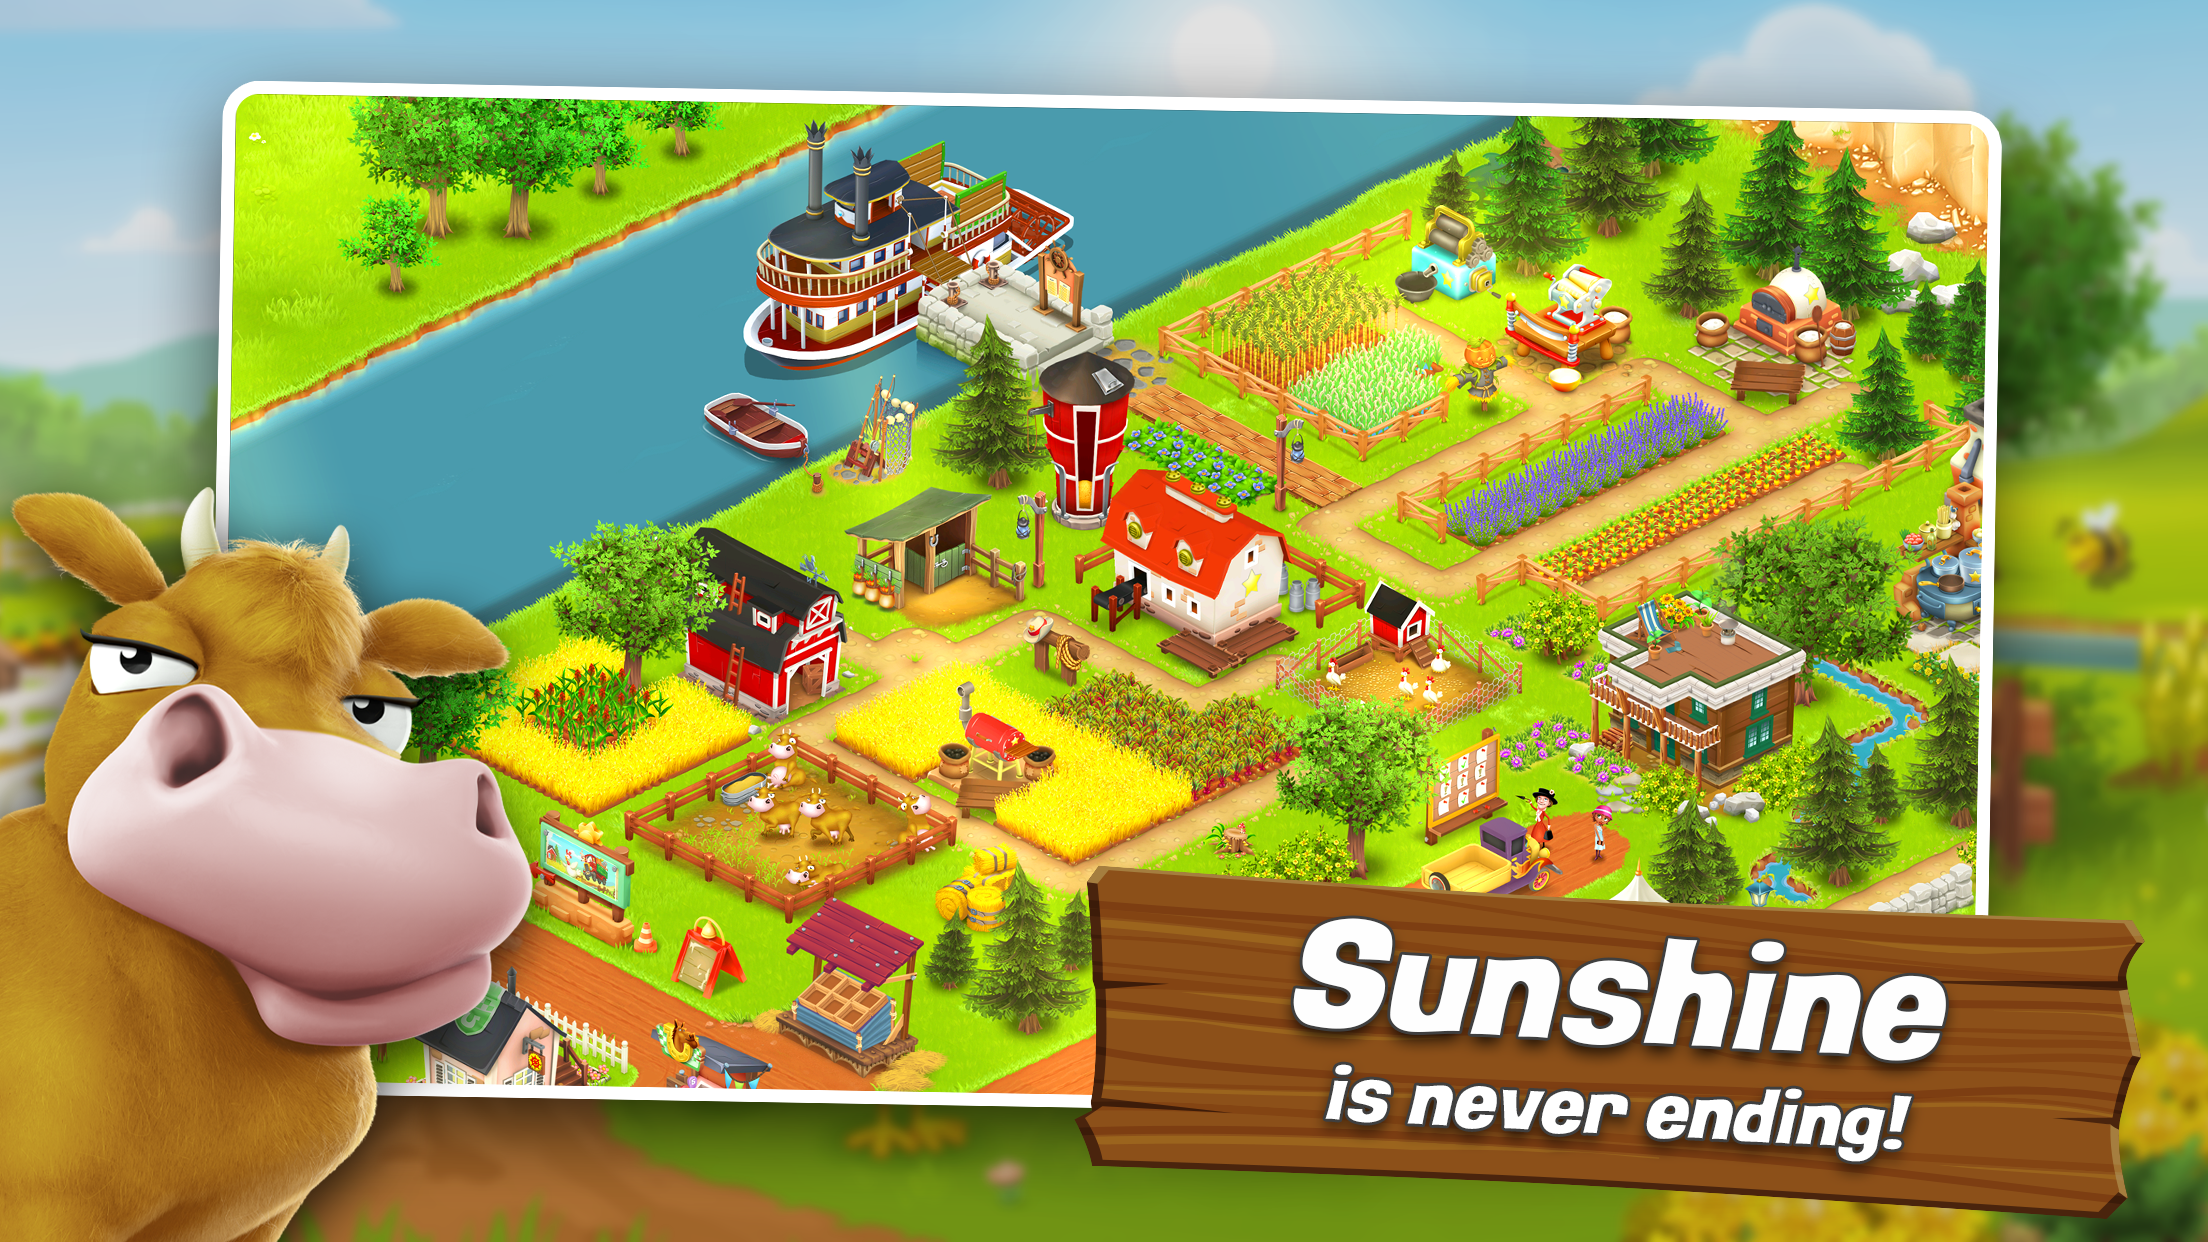 GUIDE: Hay Day names, terms and abbreviations | Hay Day Love and Trading